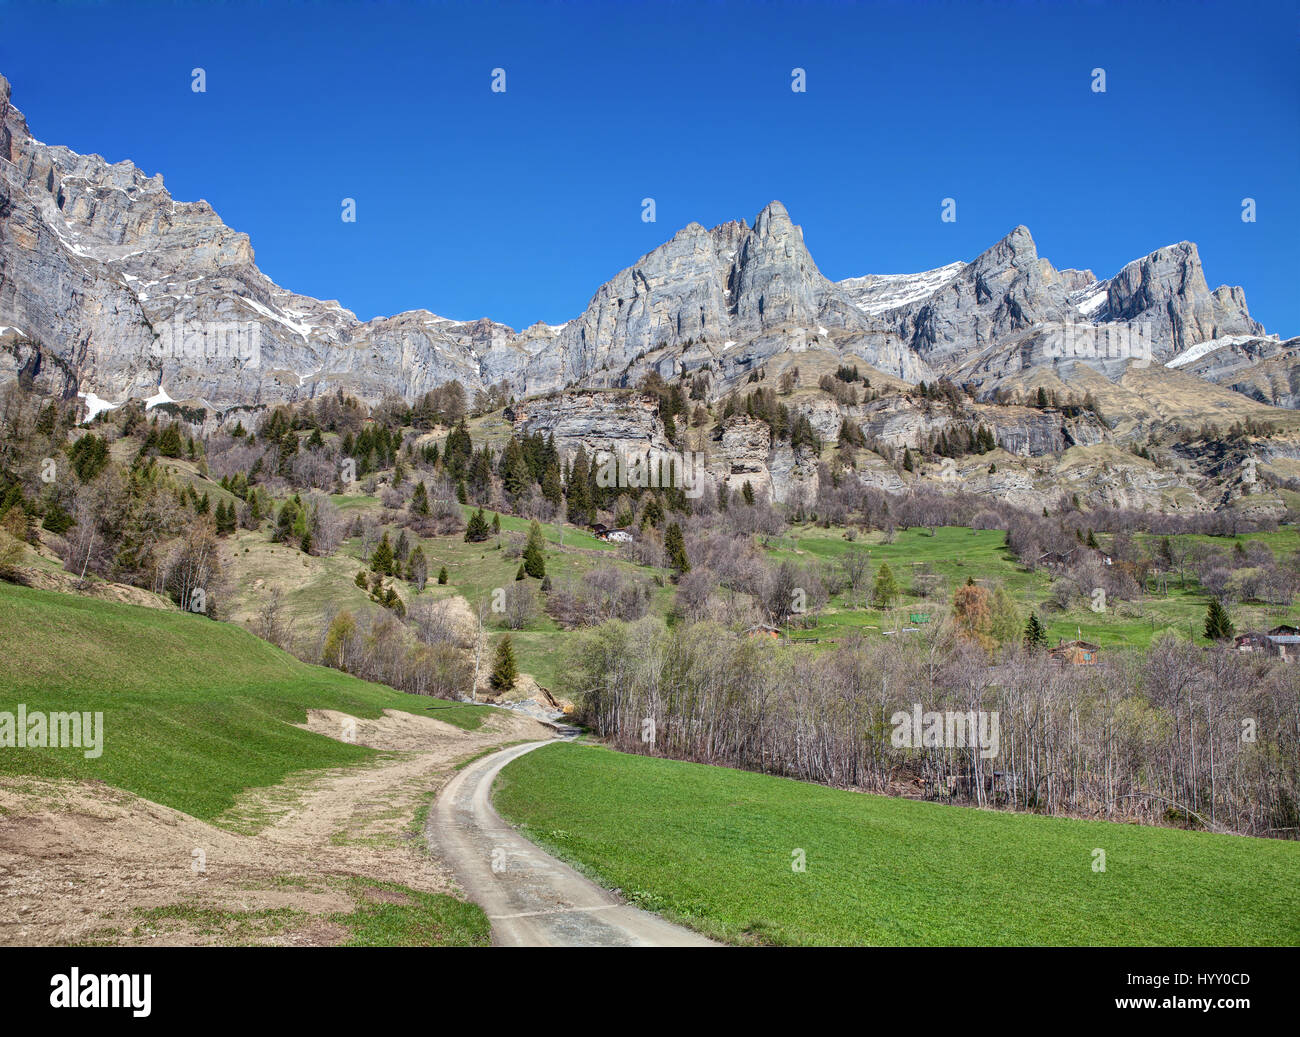 The country road   in the neighborhood of Leukerbad village at early spring, canton of Valais, Switzerland Stock Photo